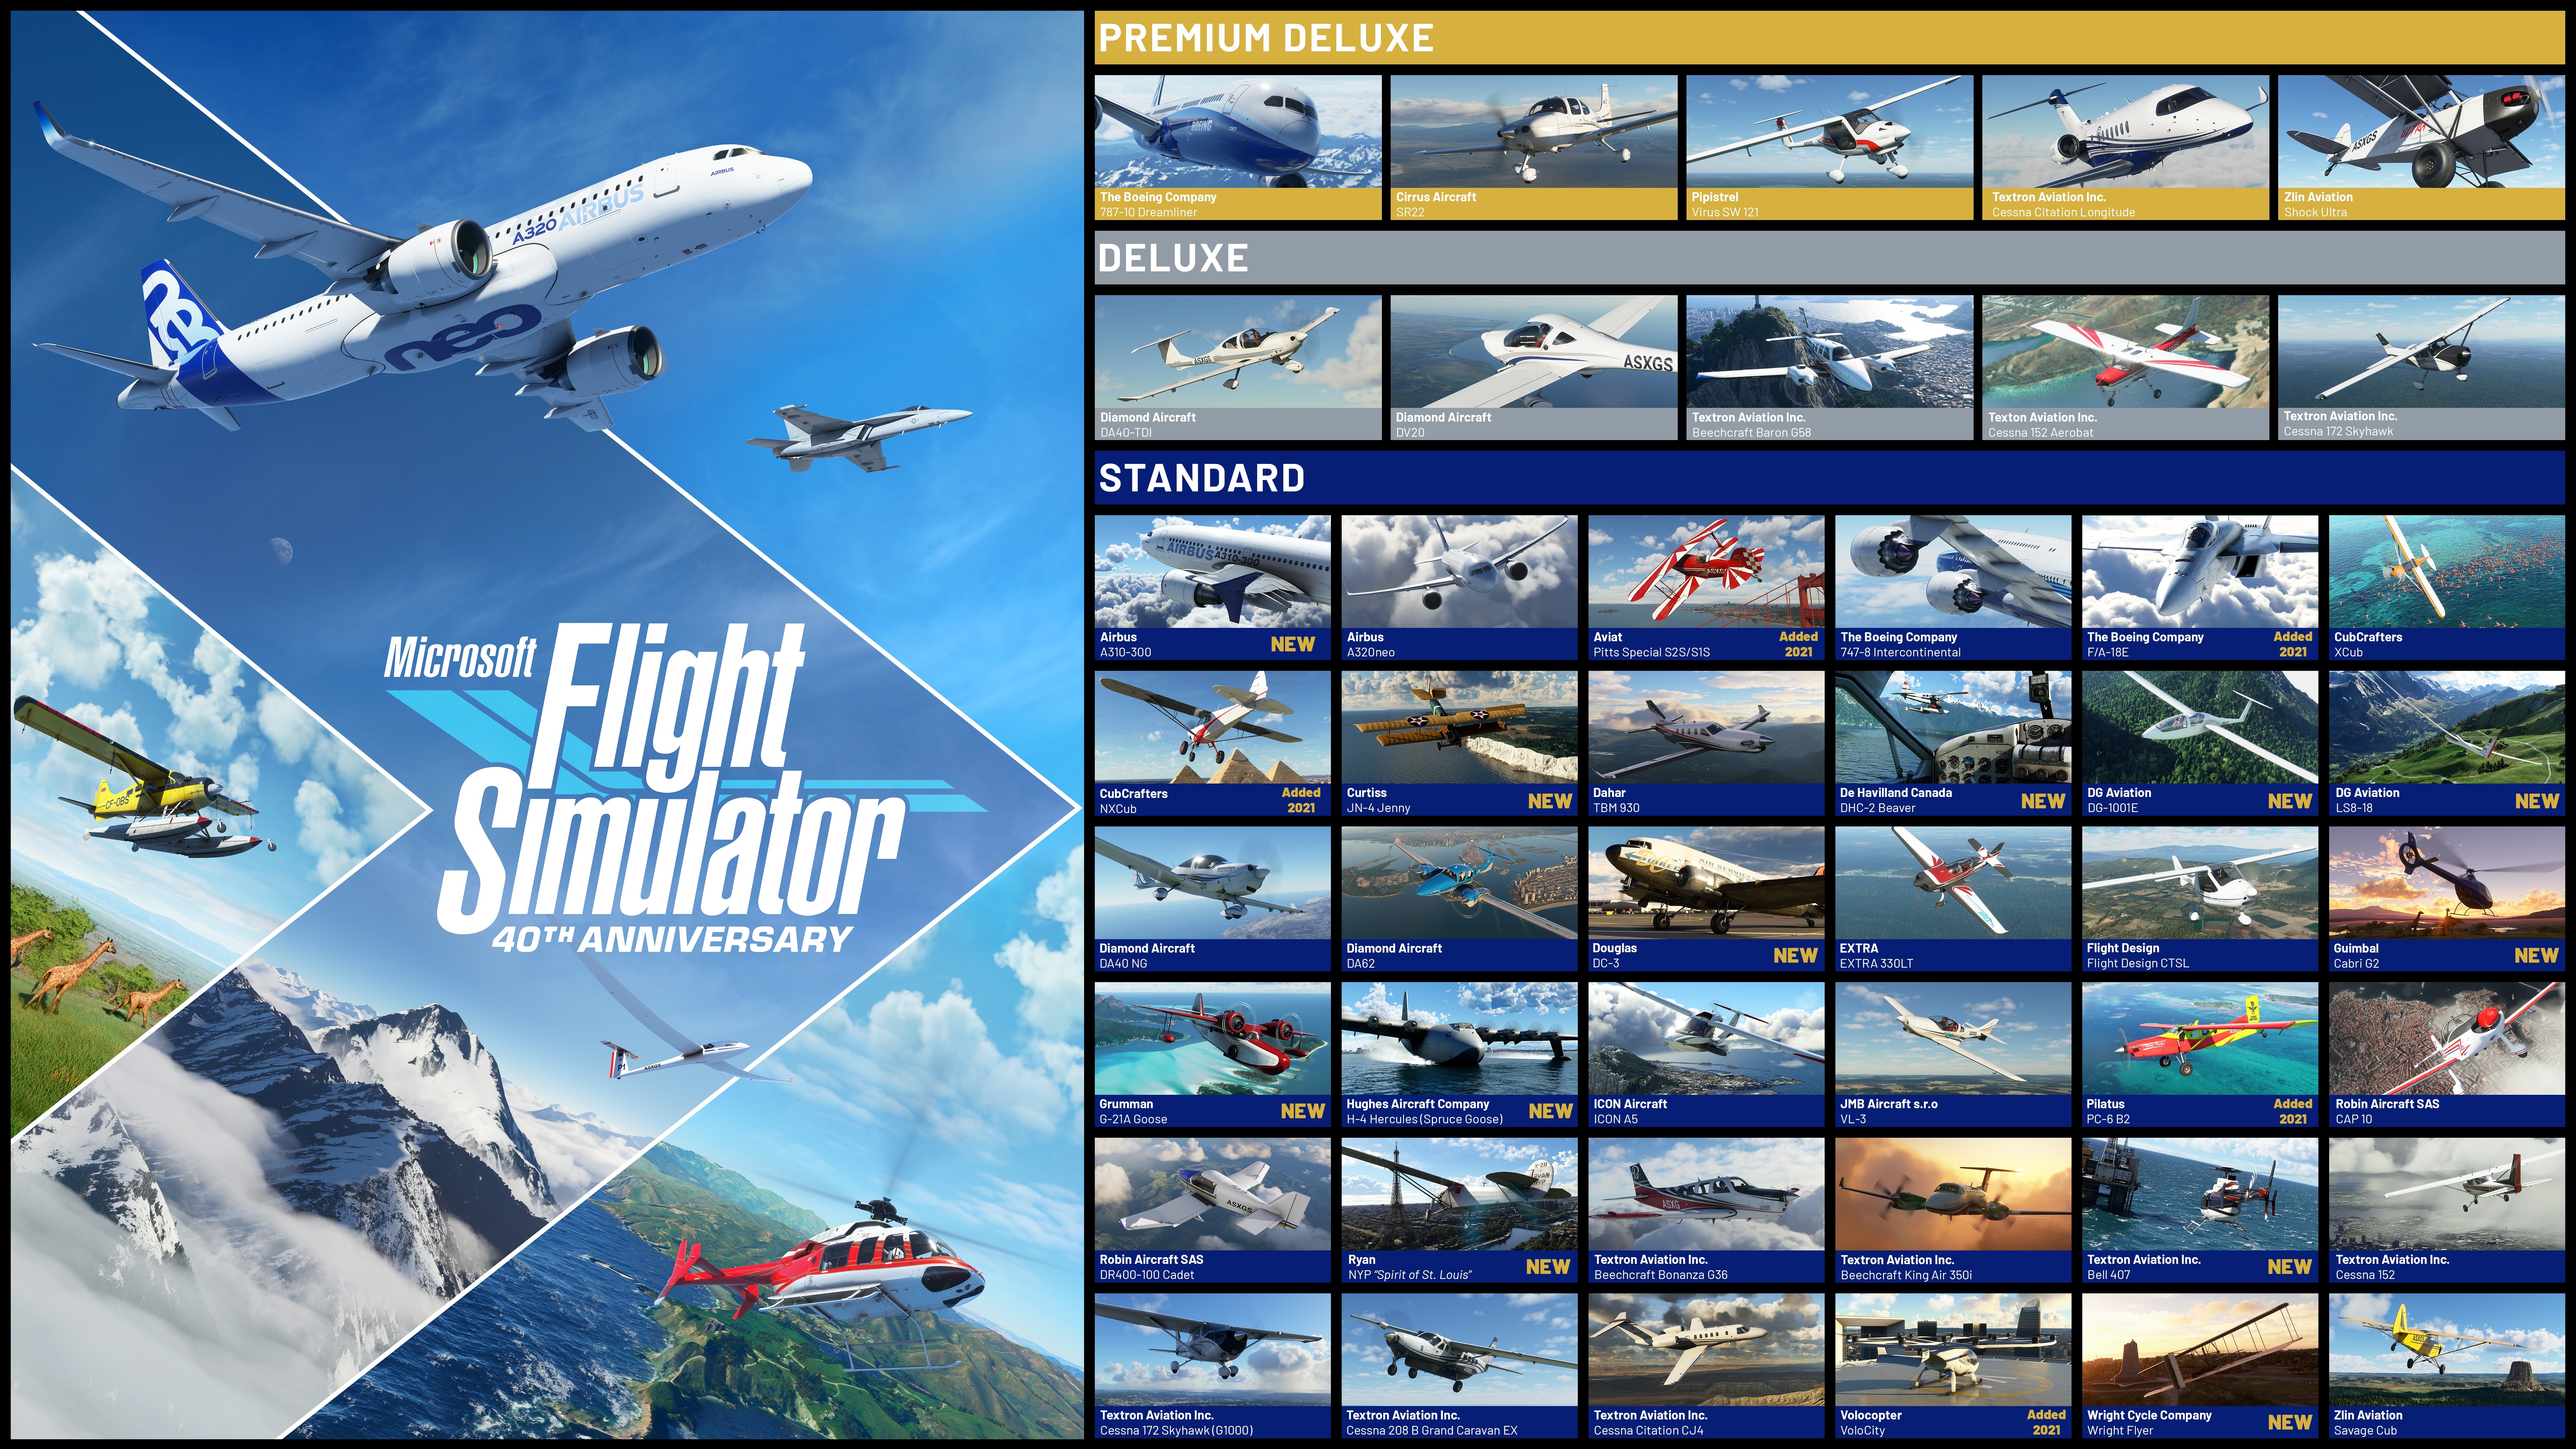 Microsoft Flight Simulator - The next generation of one of the most beloved  simulation franchises